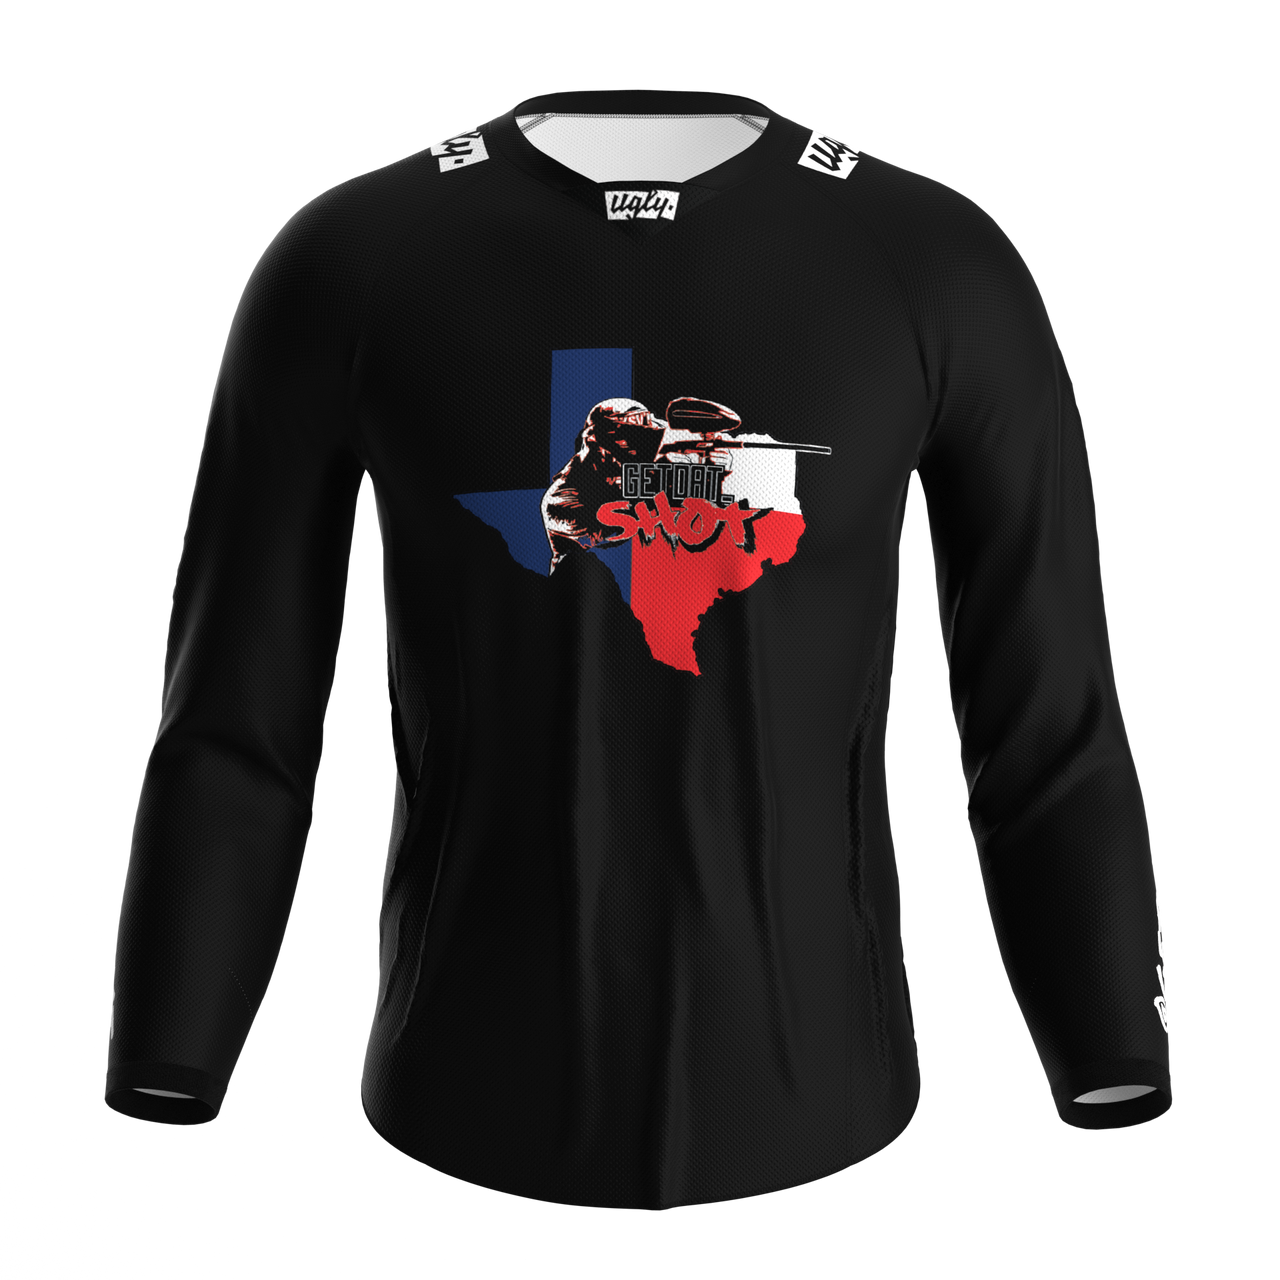 Chicago Practice Jersey – Ruthless Paintball Products